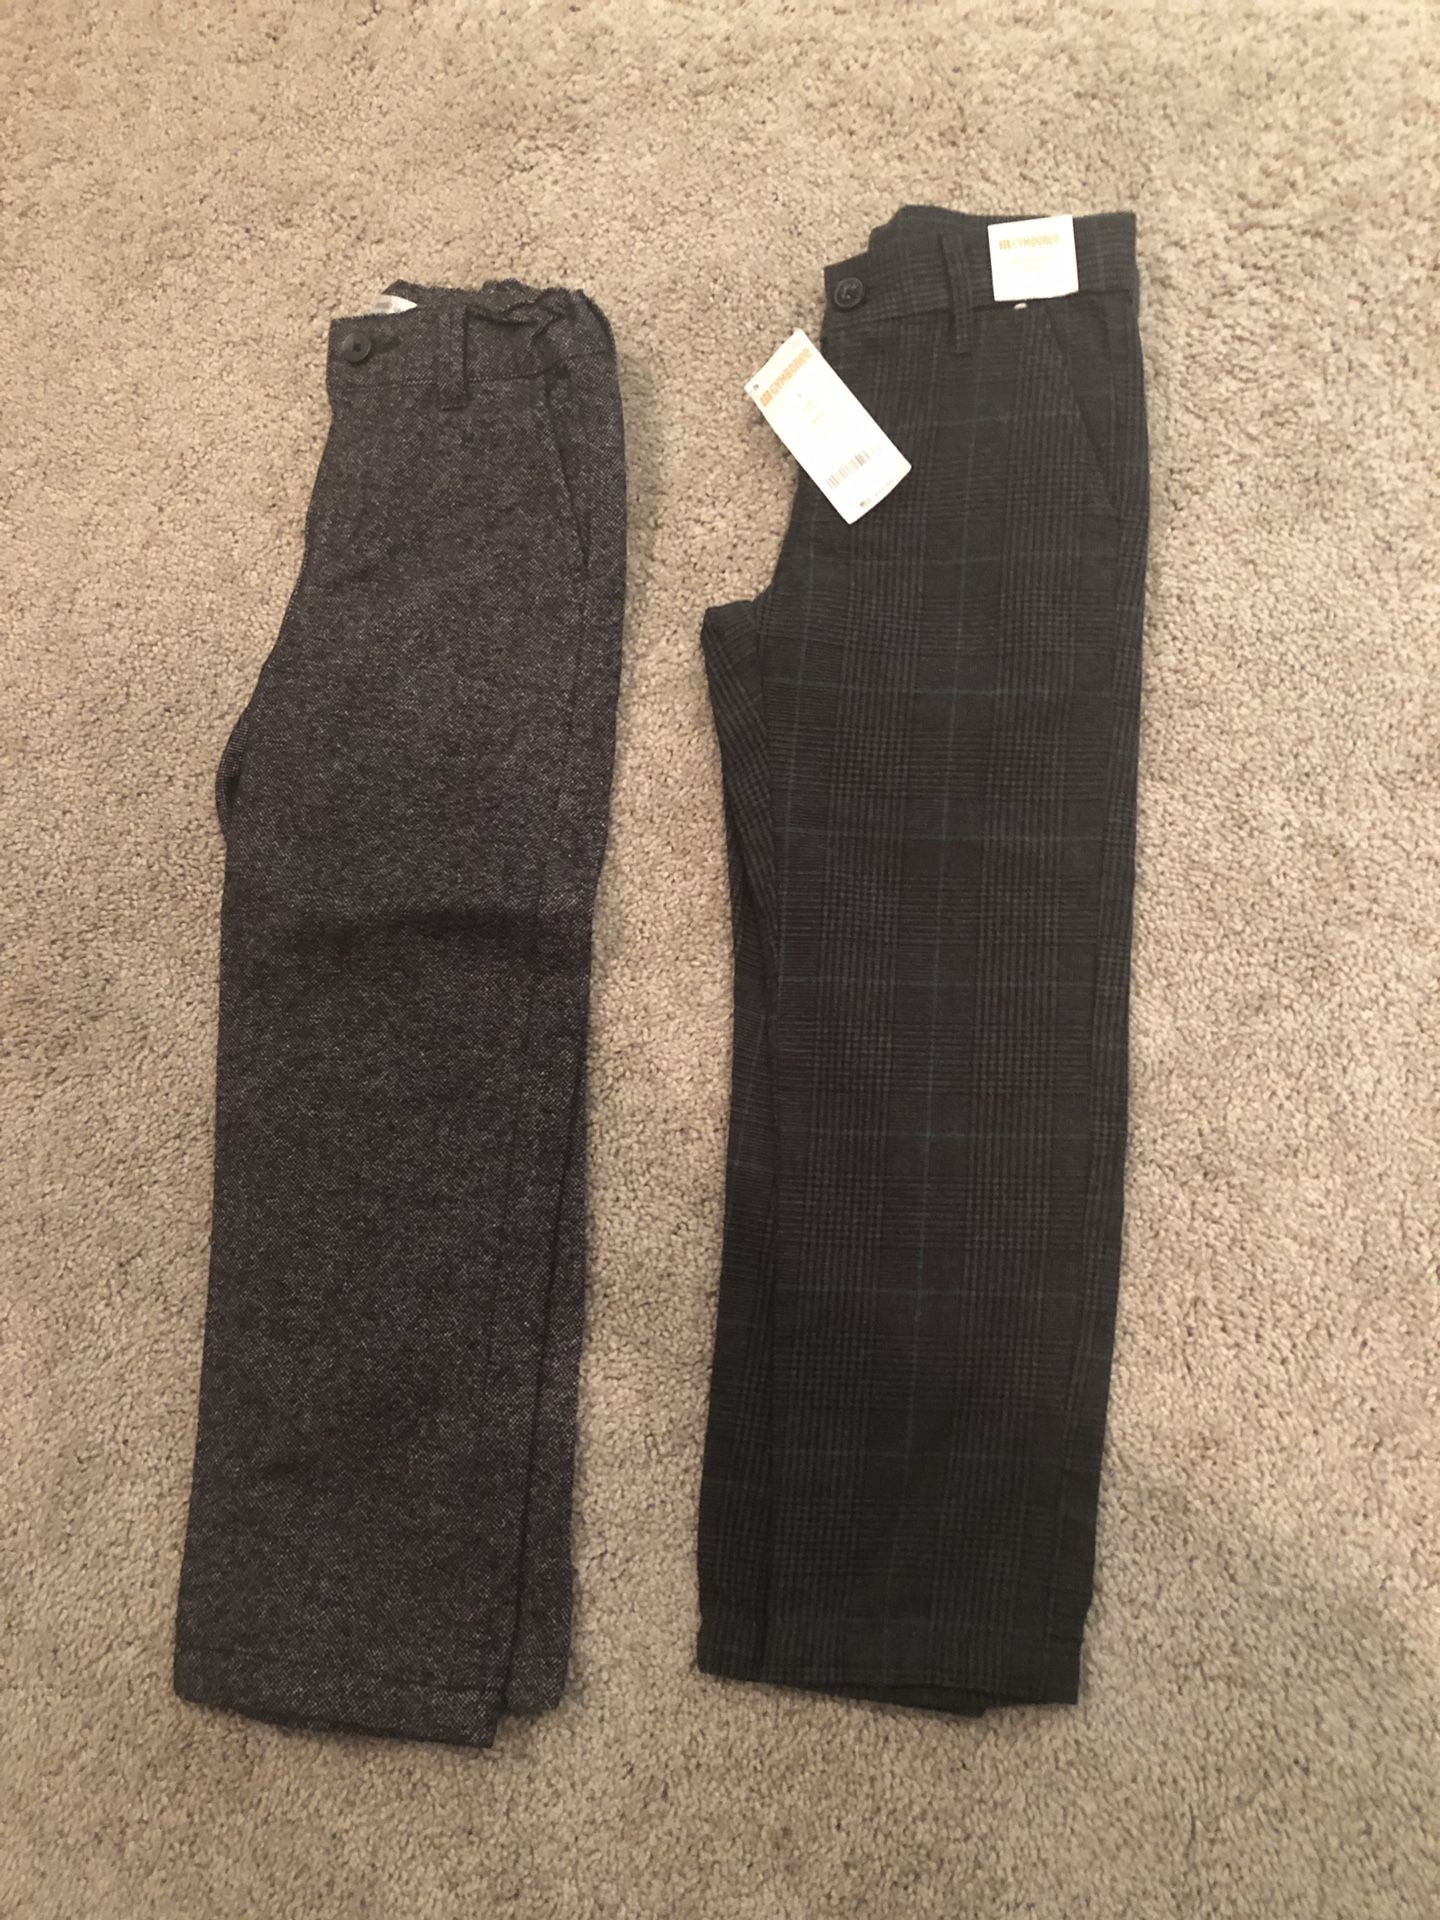 Size 5 pants for boys